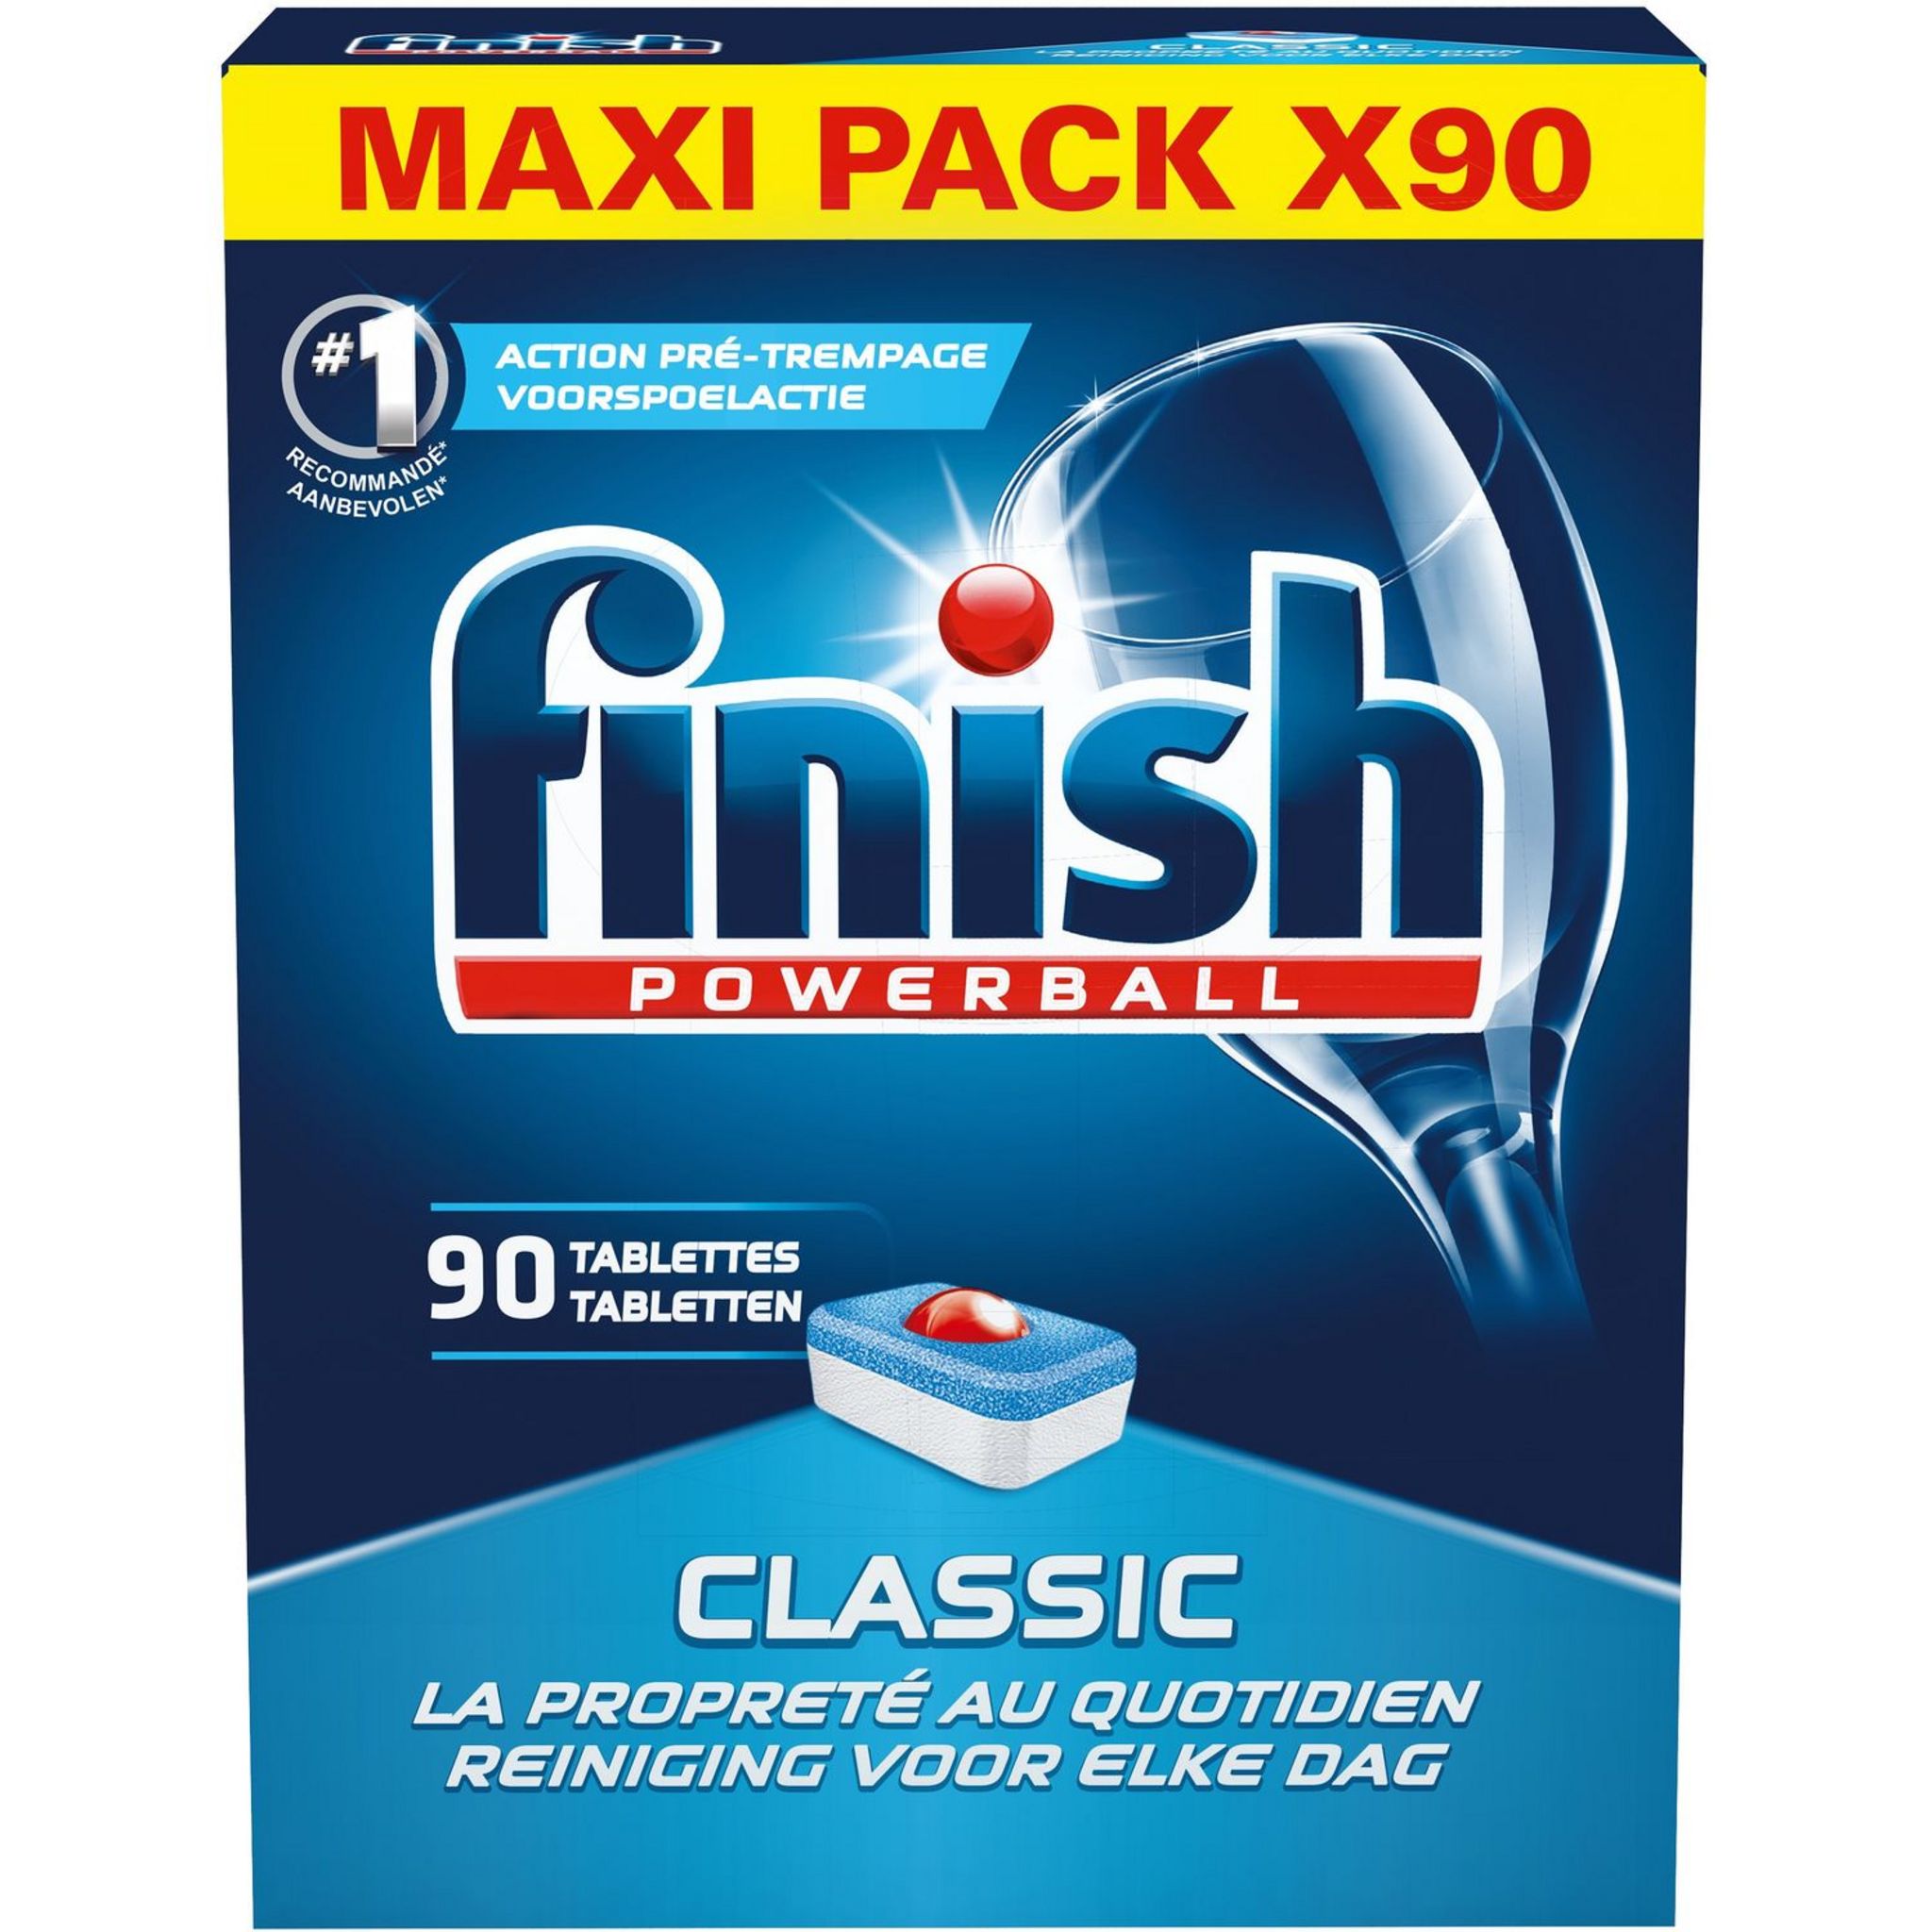 FINISH Powerball tablettes lave-vaisselle classic 40 tablettes pas cher 